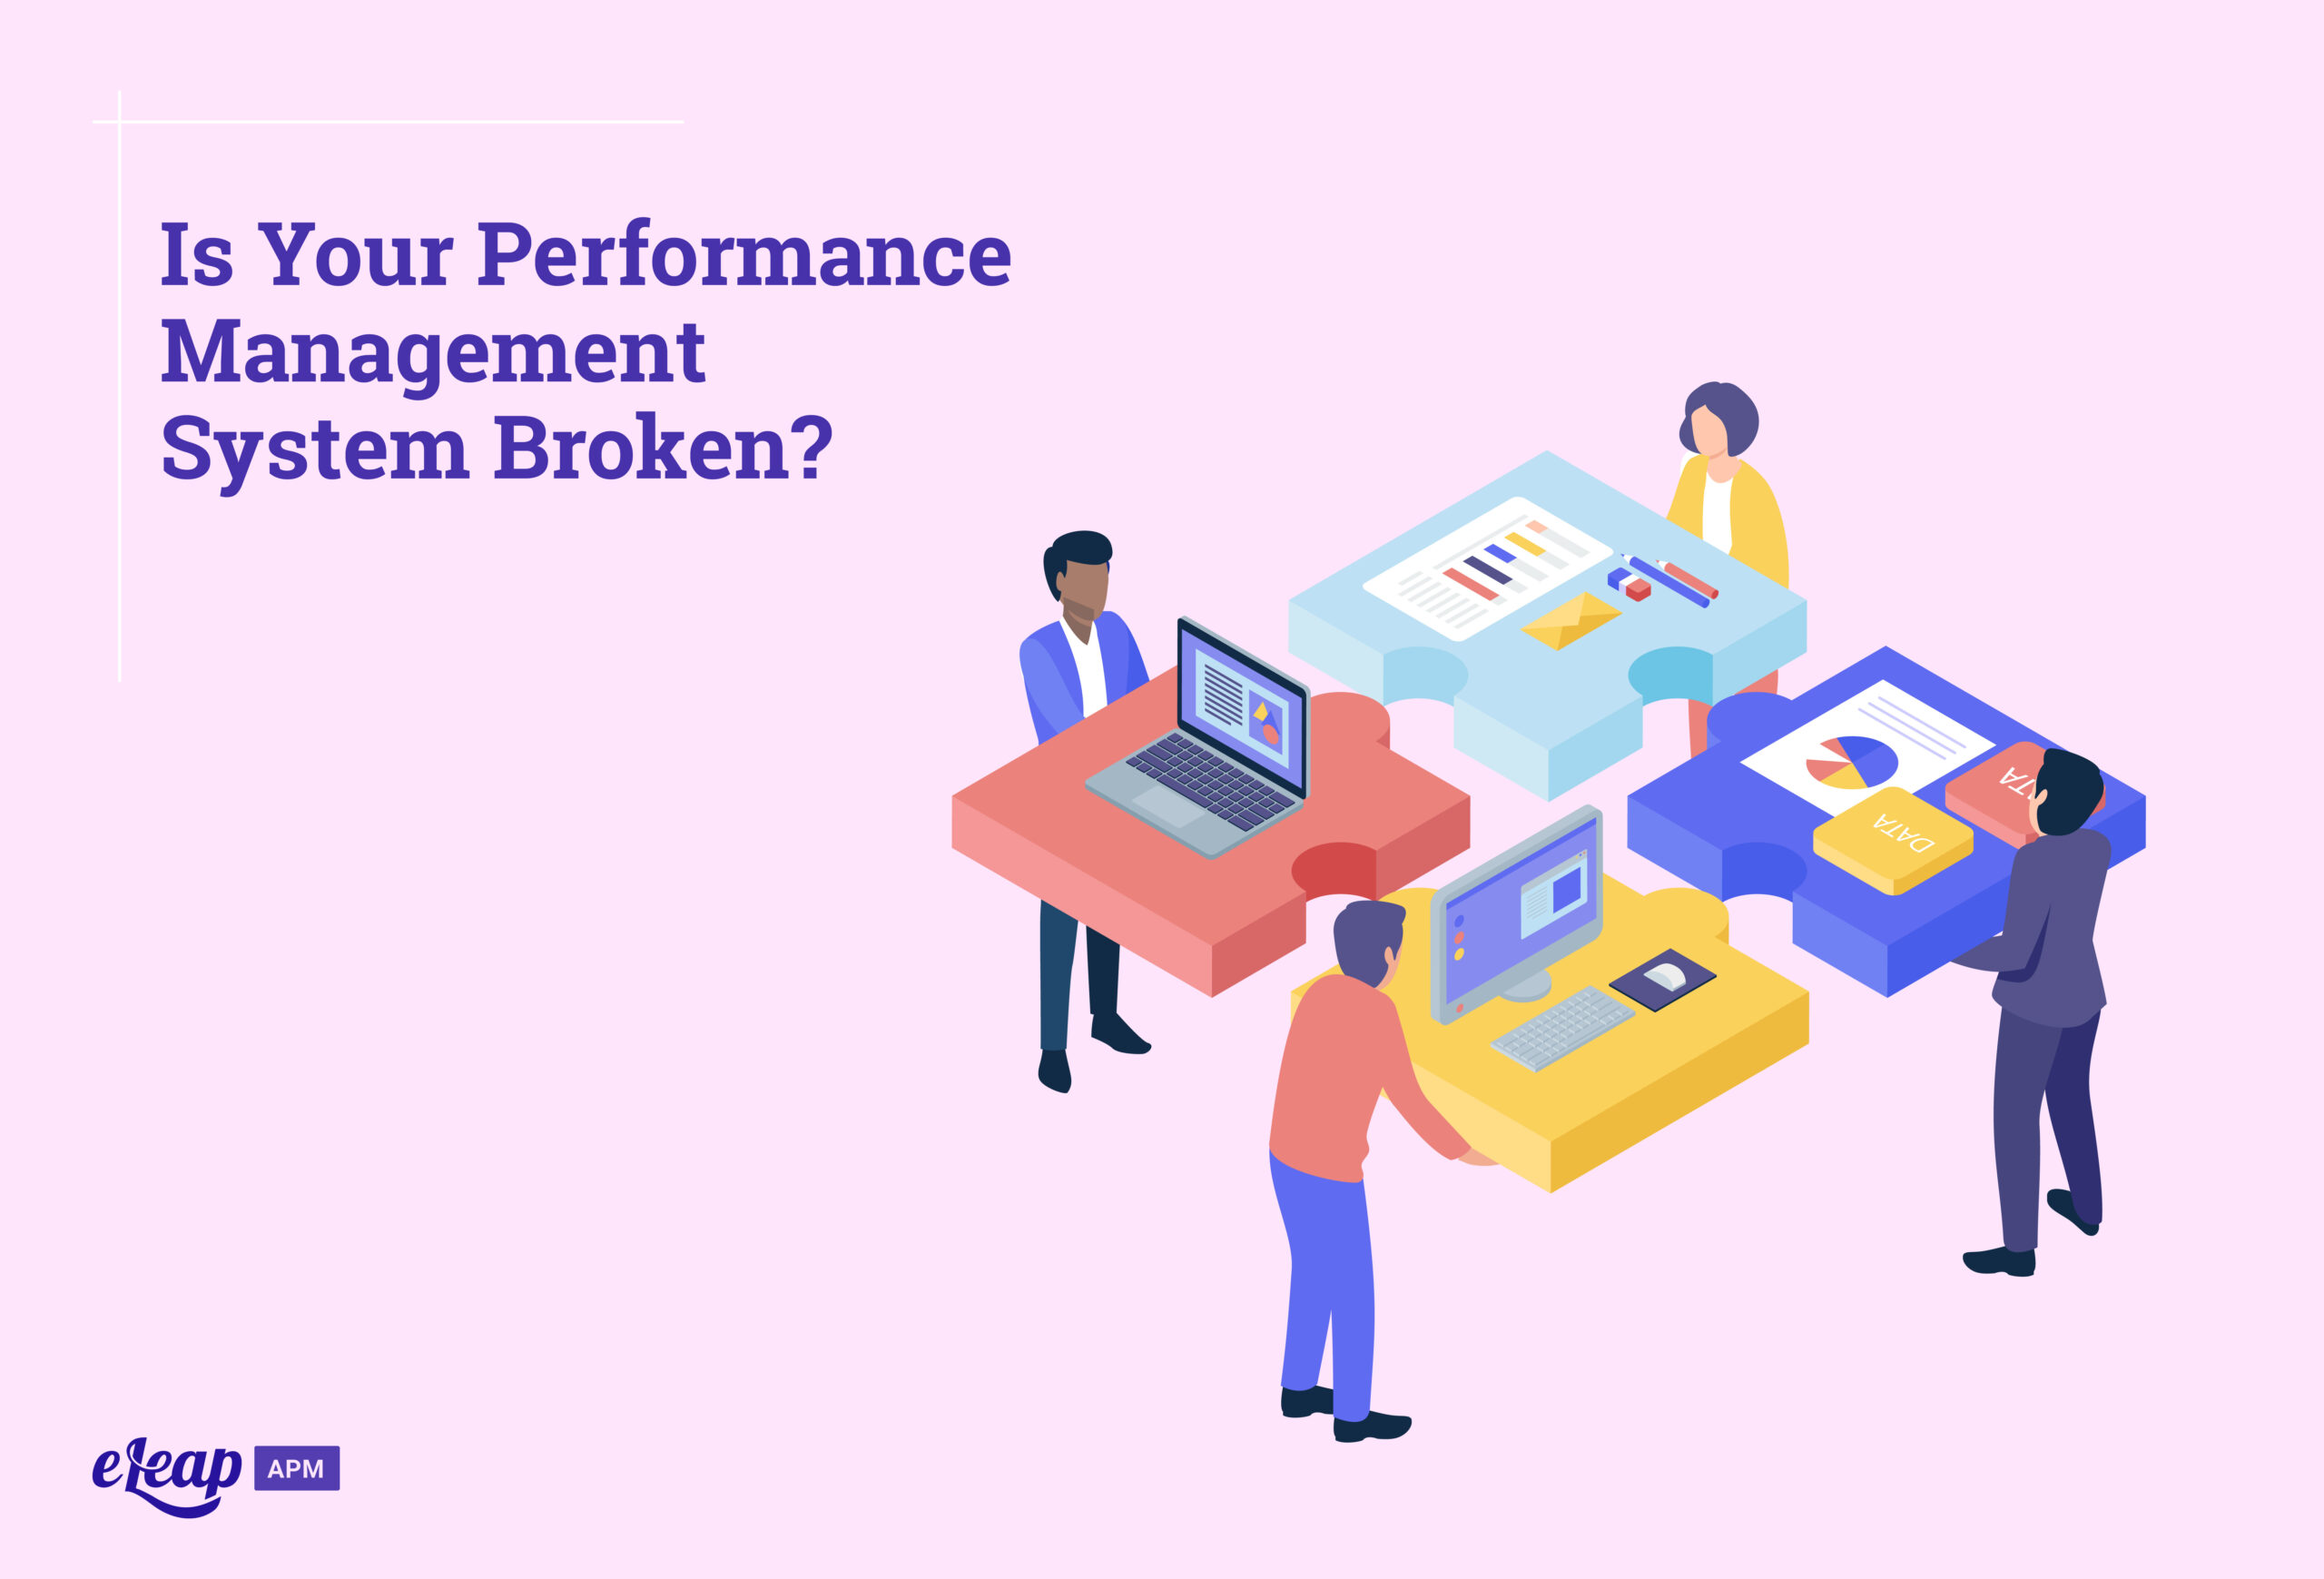 Is Your Performance Management System Broken?